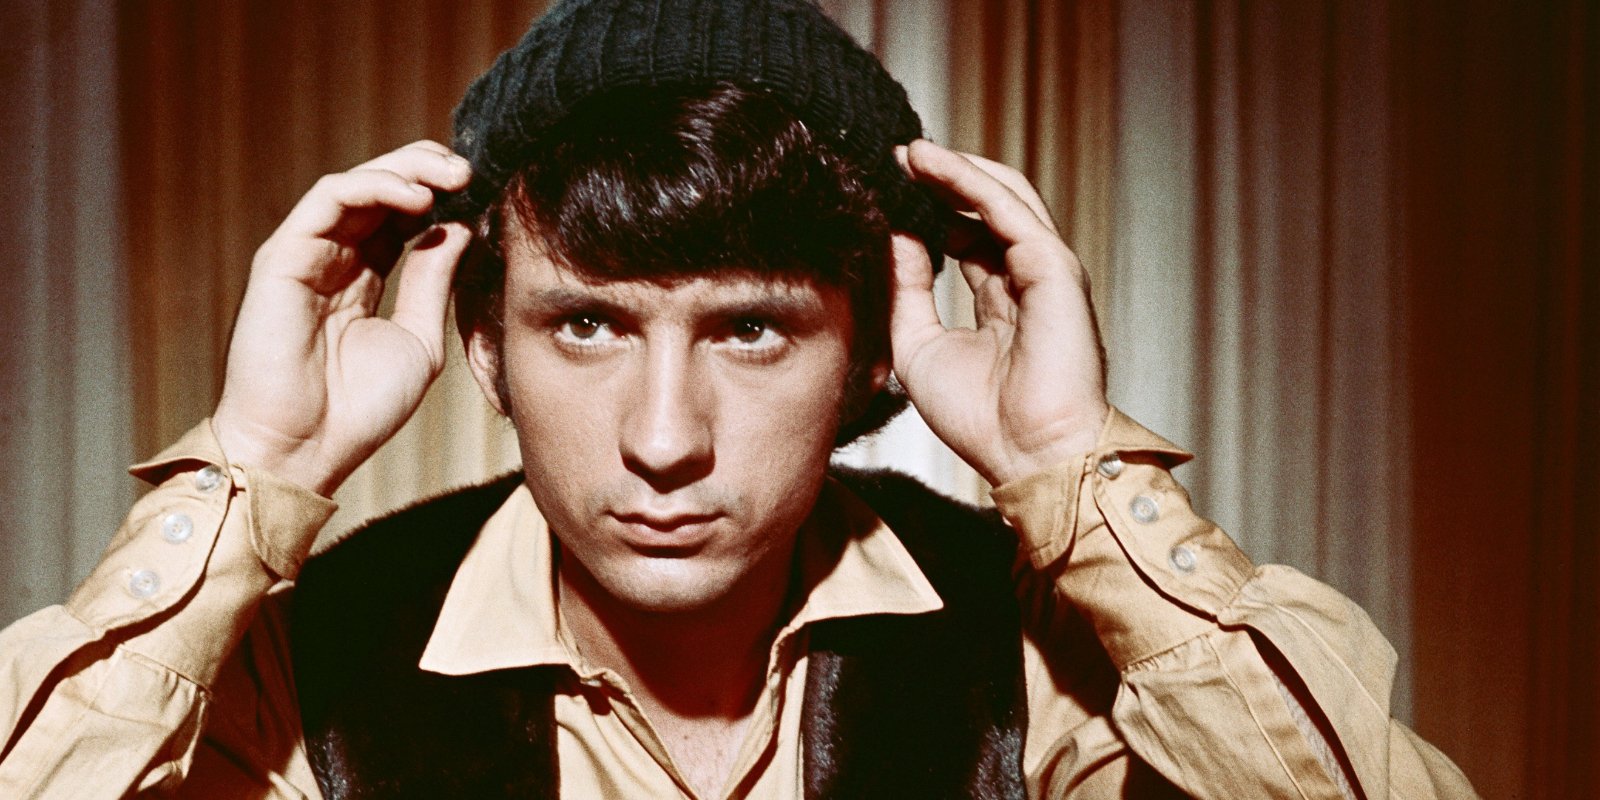 Mike Nesmith Said This Beloved Monkees TV Tune Set a Songwriting Standard for Years Thereafter